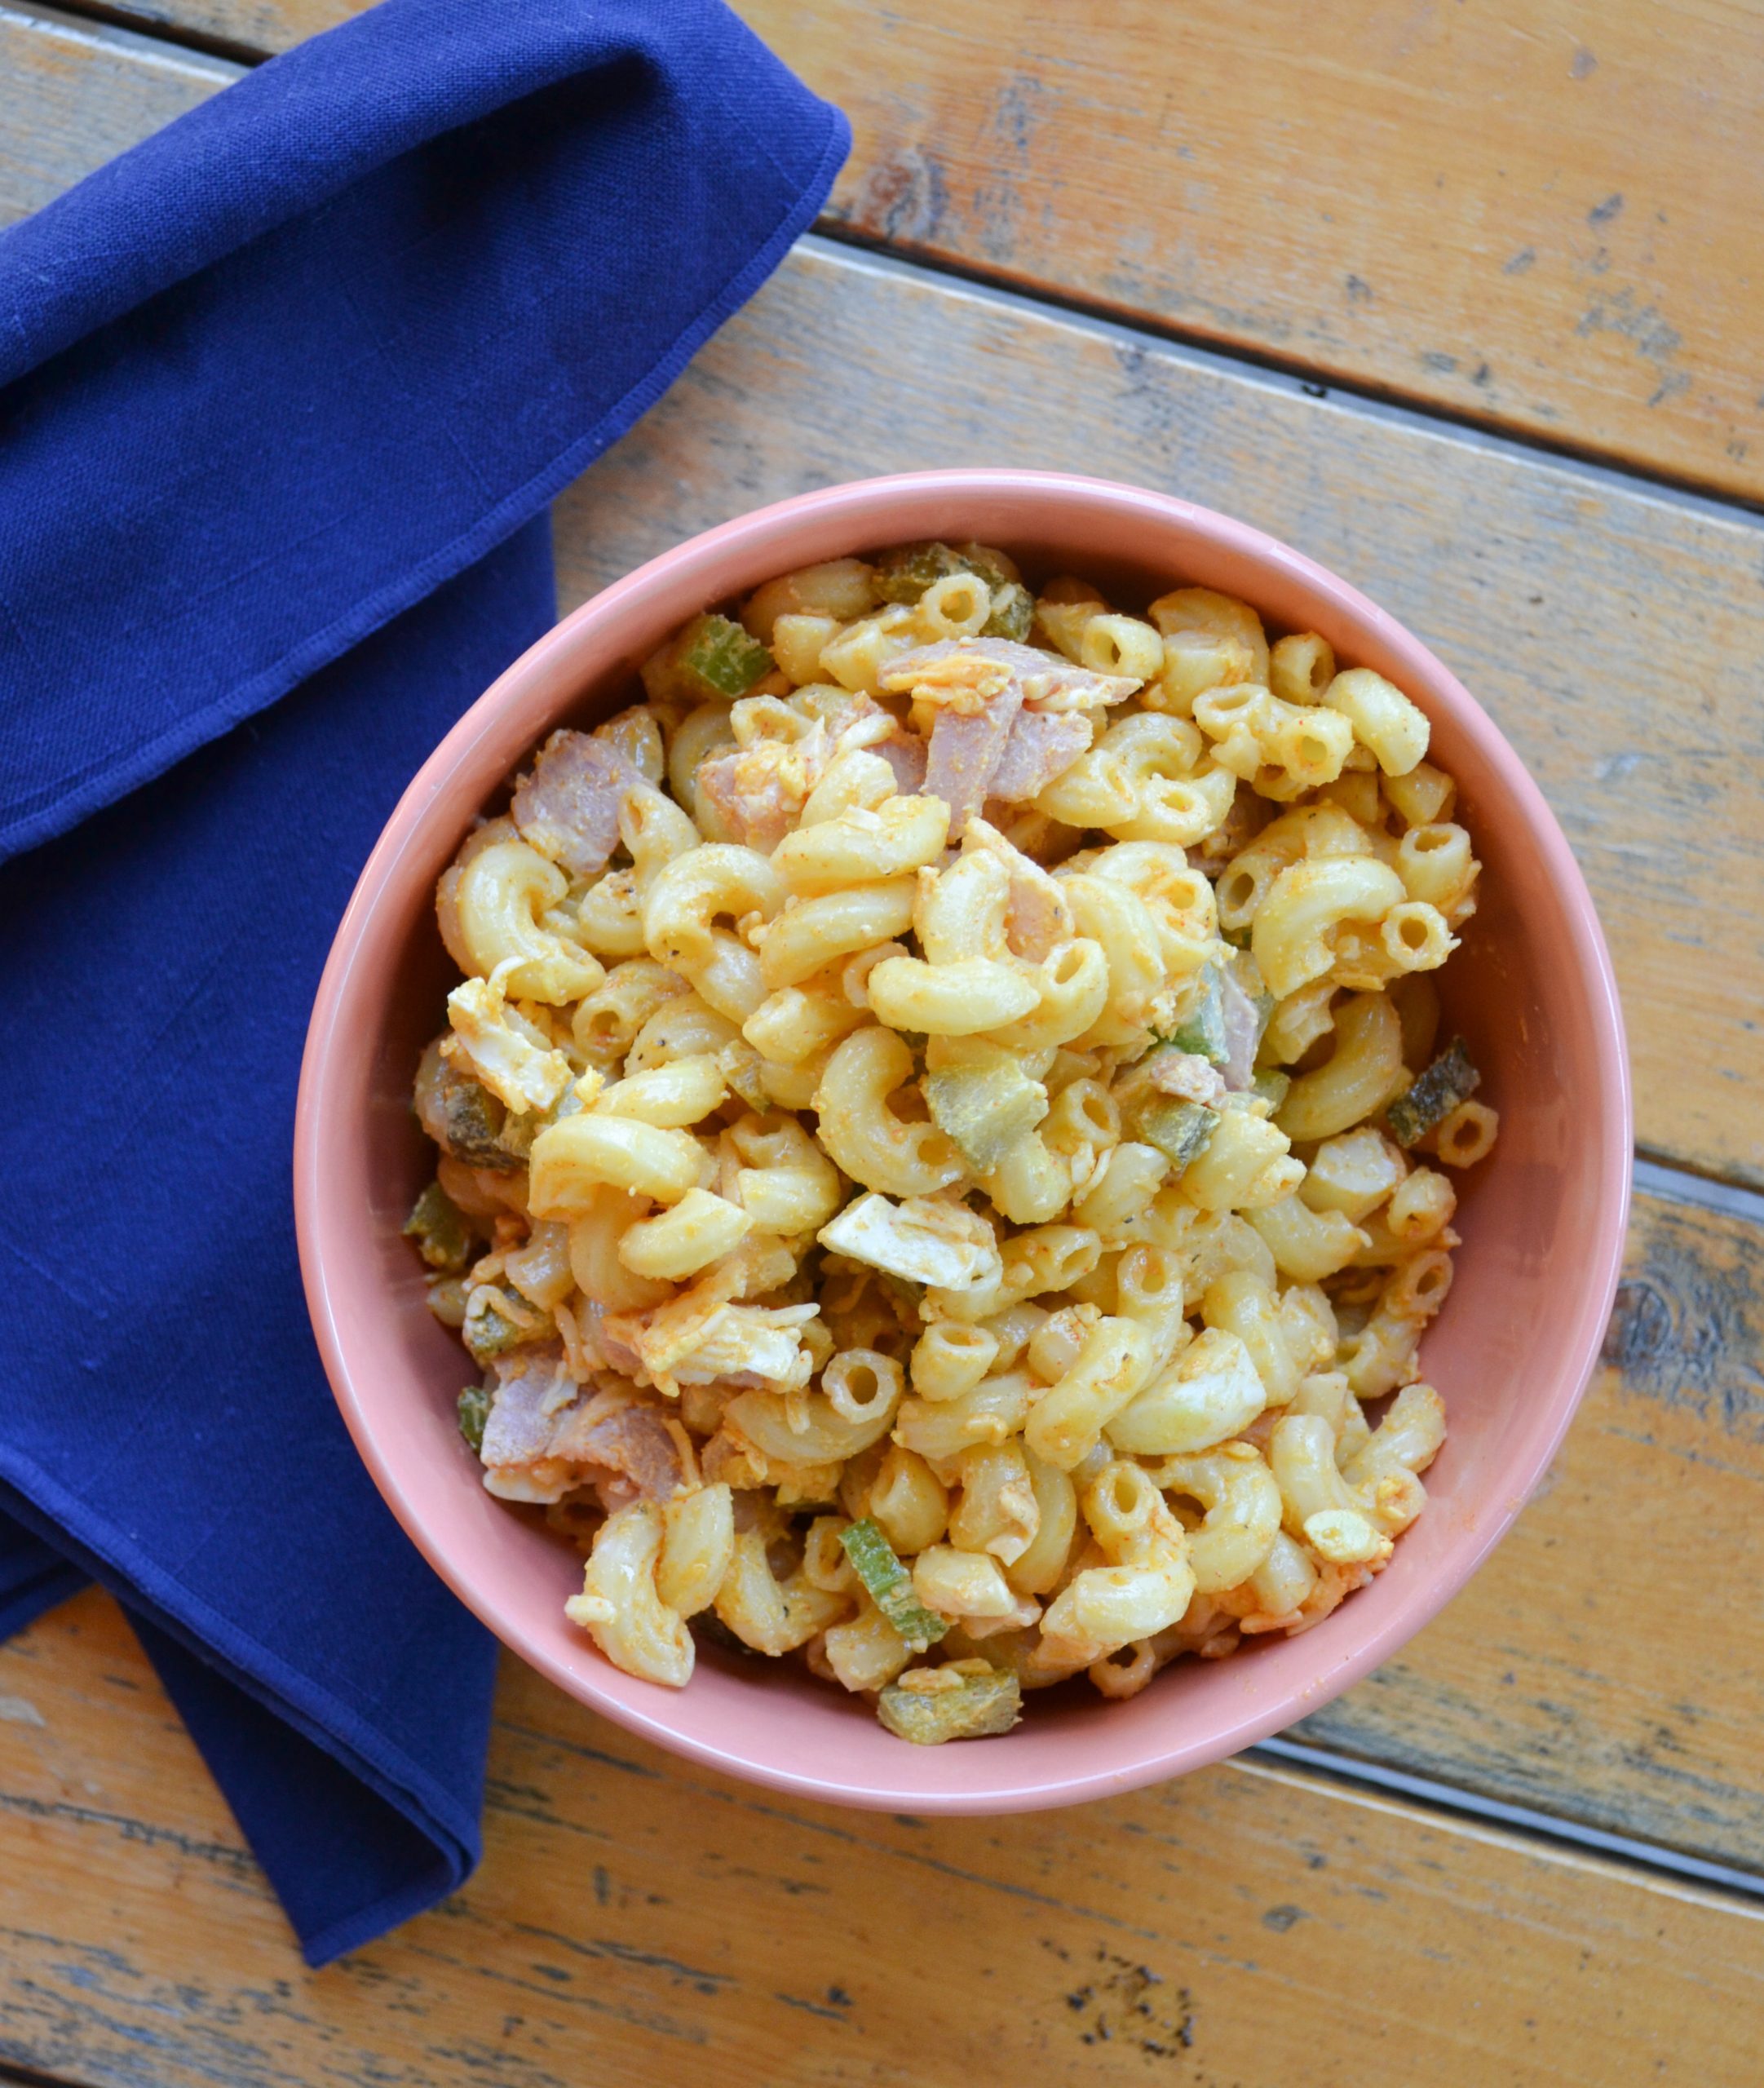 Every barbecue, picnic, potluck need this Macaroni Salad. It's easy to make and taste great!